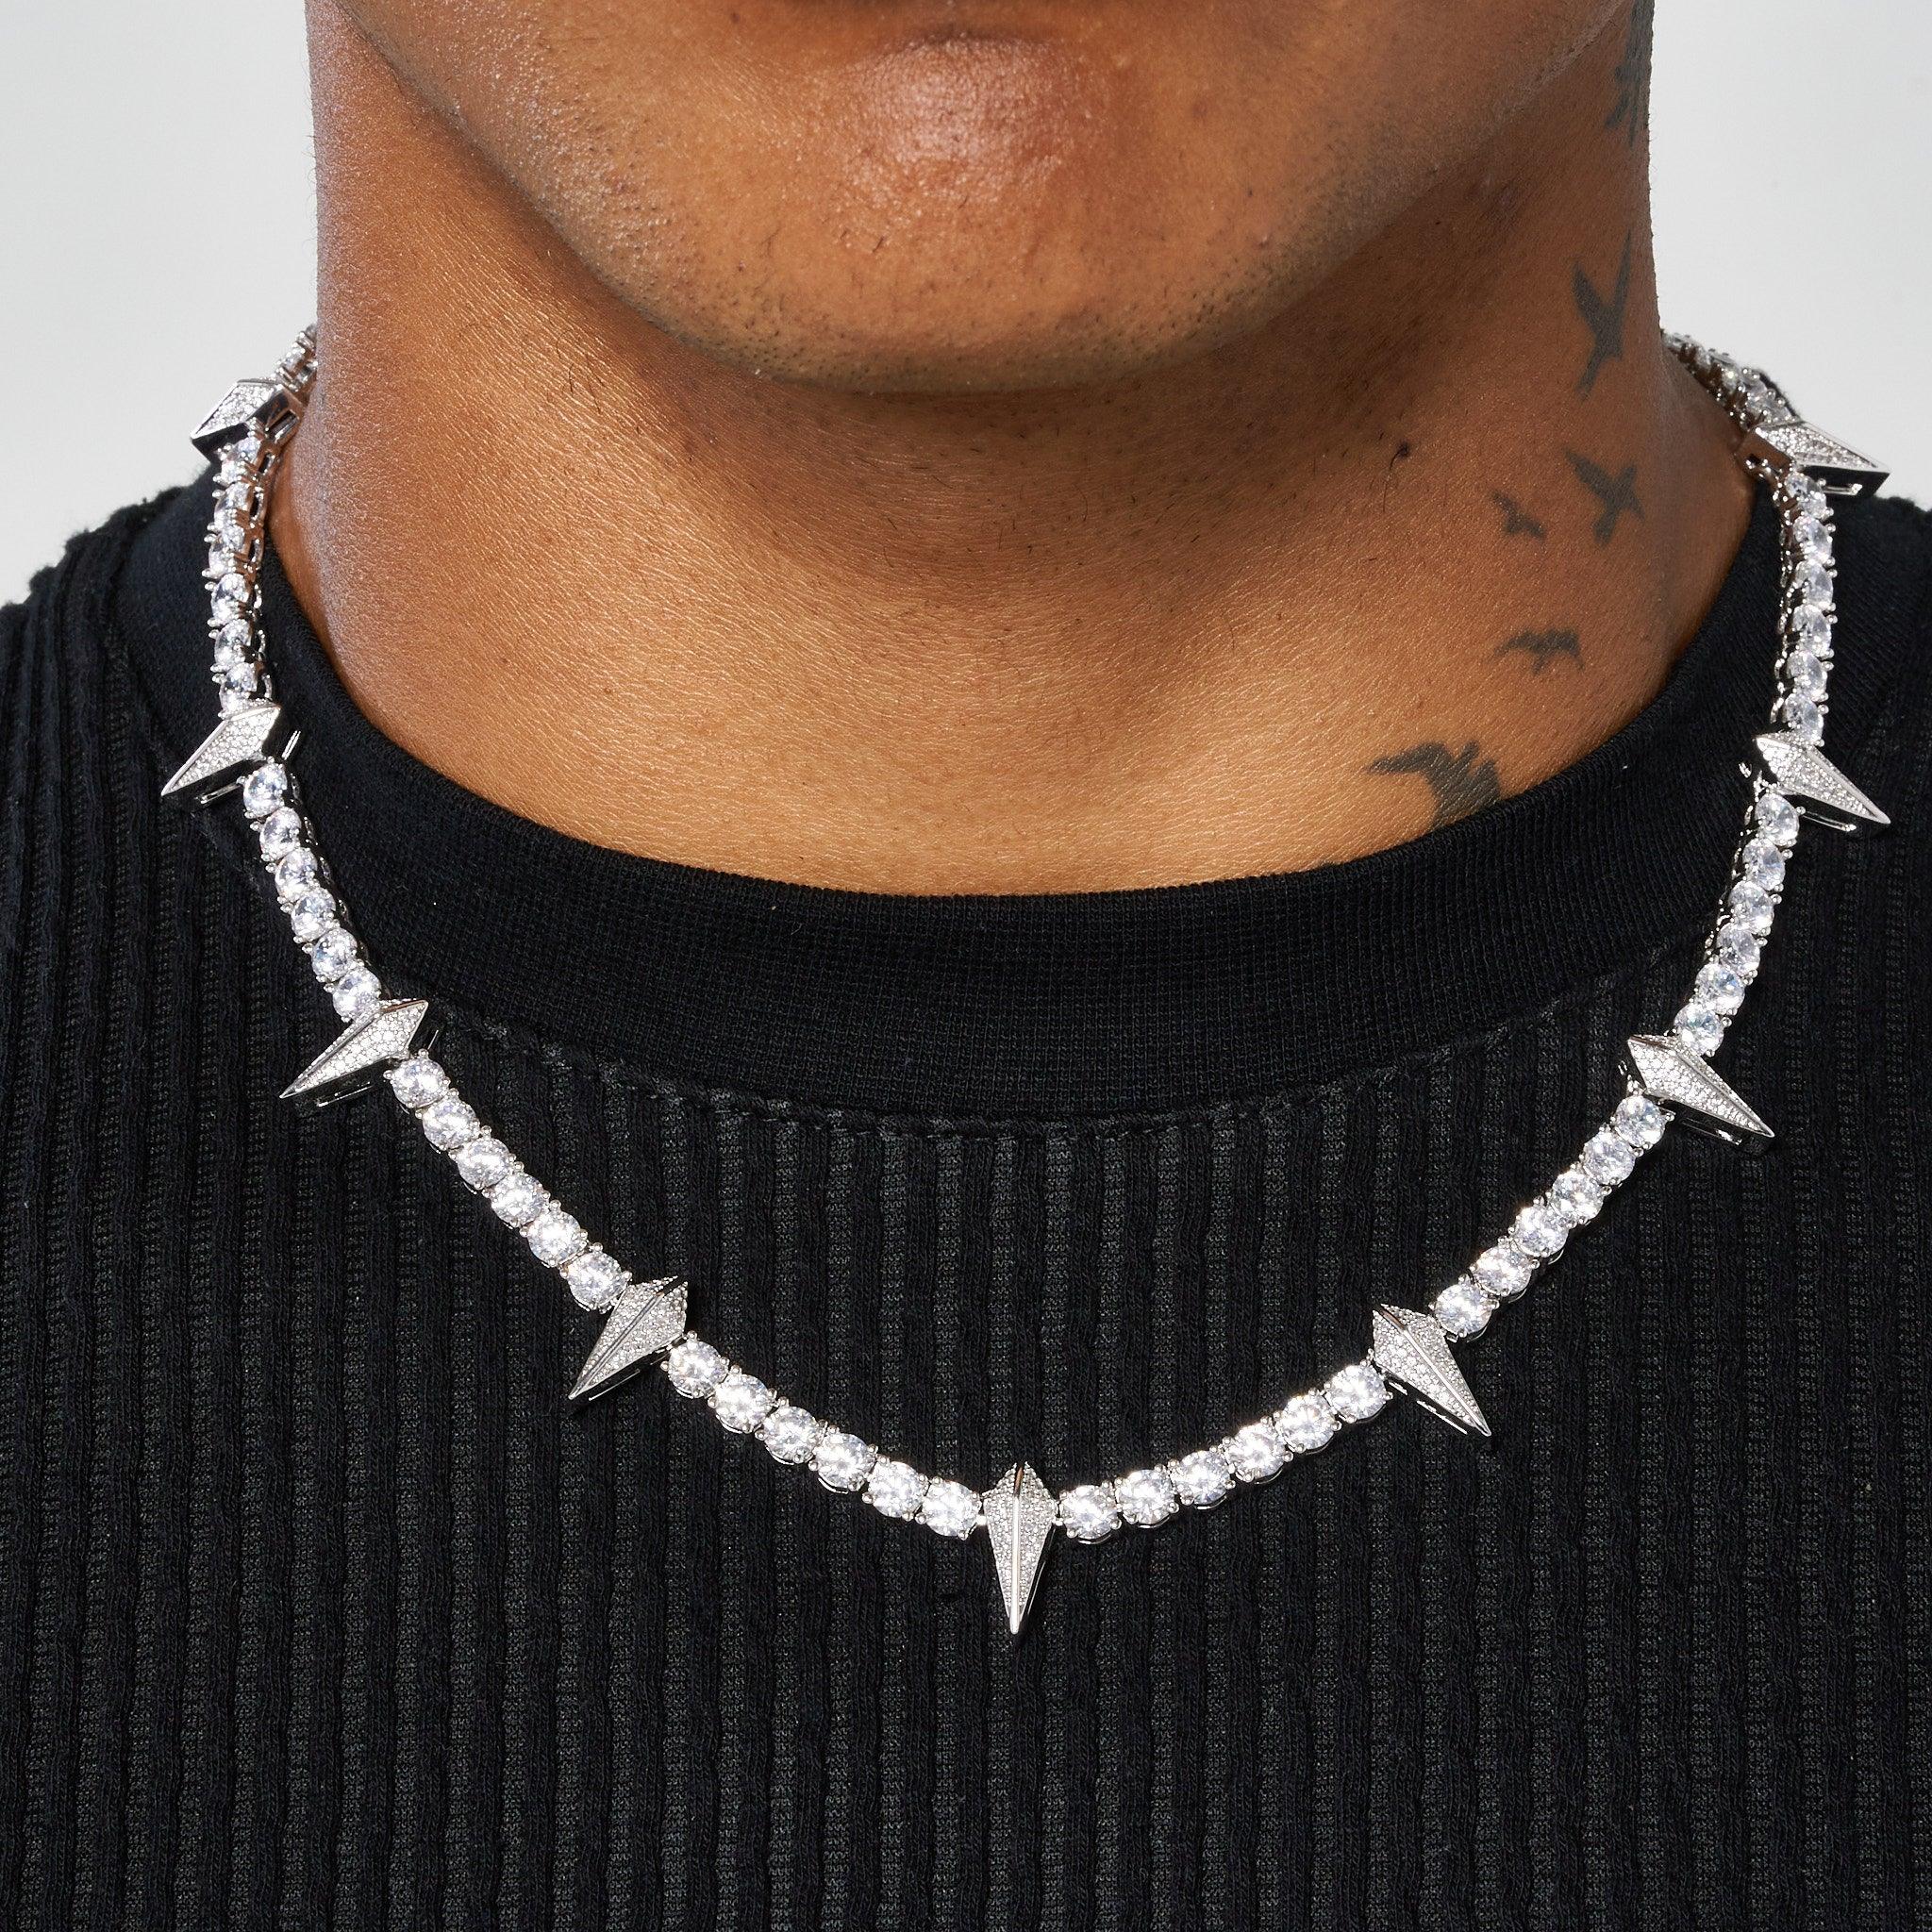 5mm PAVE SPIKE TENNIS CHAIN - WHITE GOLD